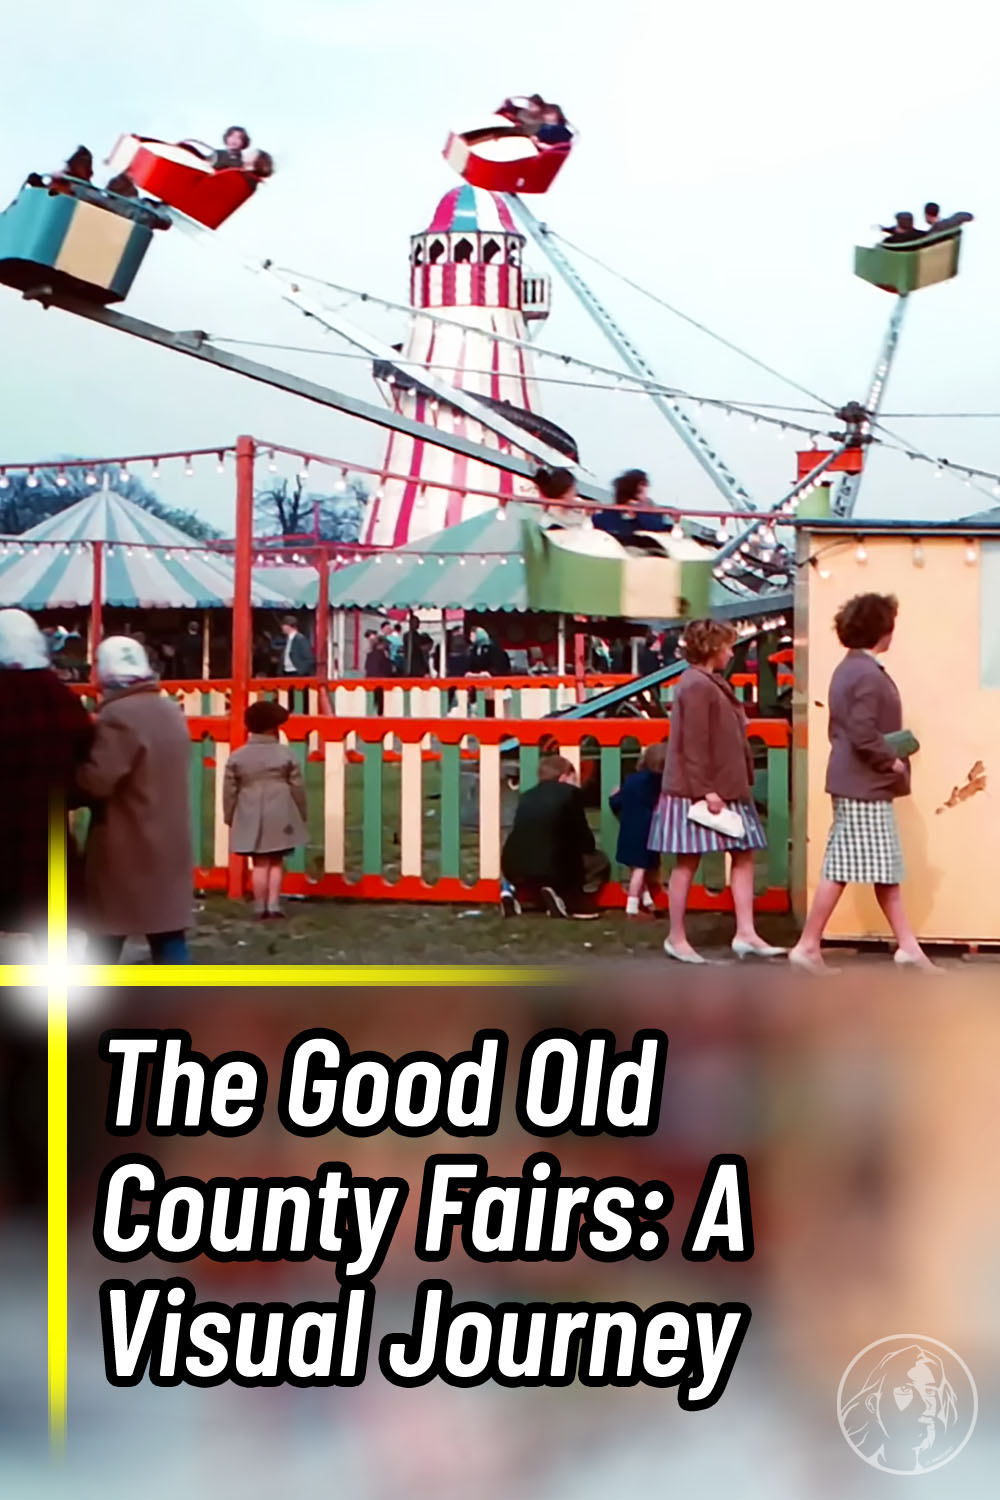 The Good Old County Fairs: A Visual Journey